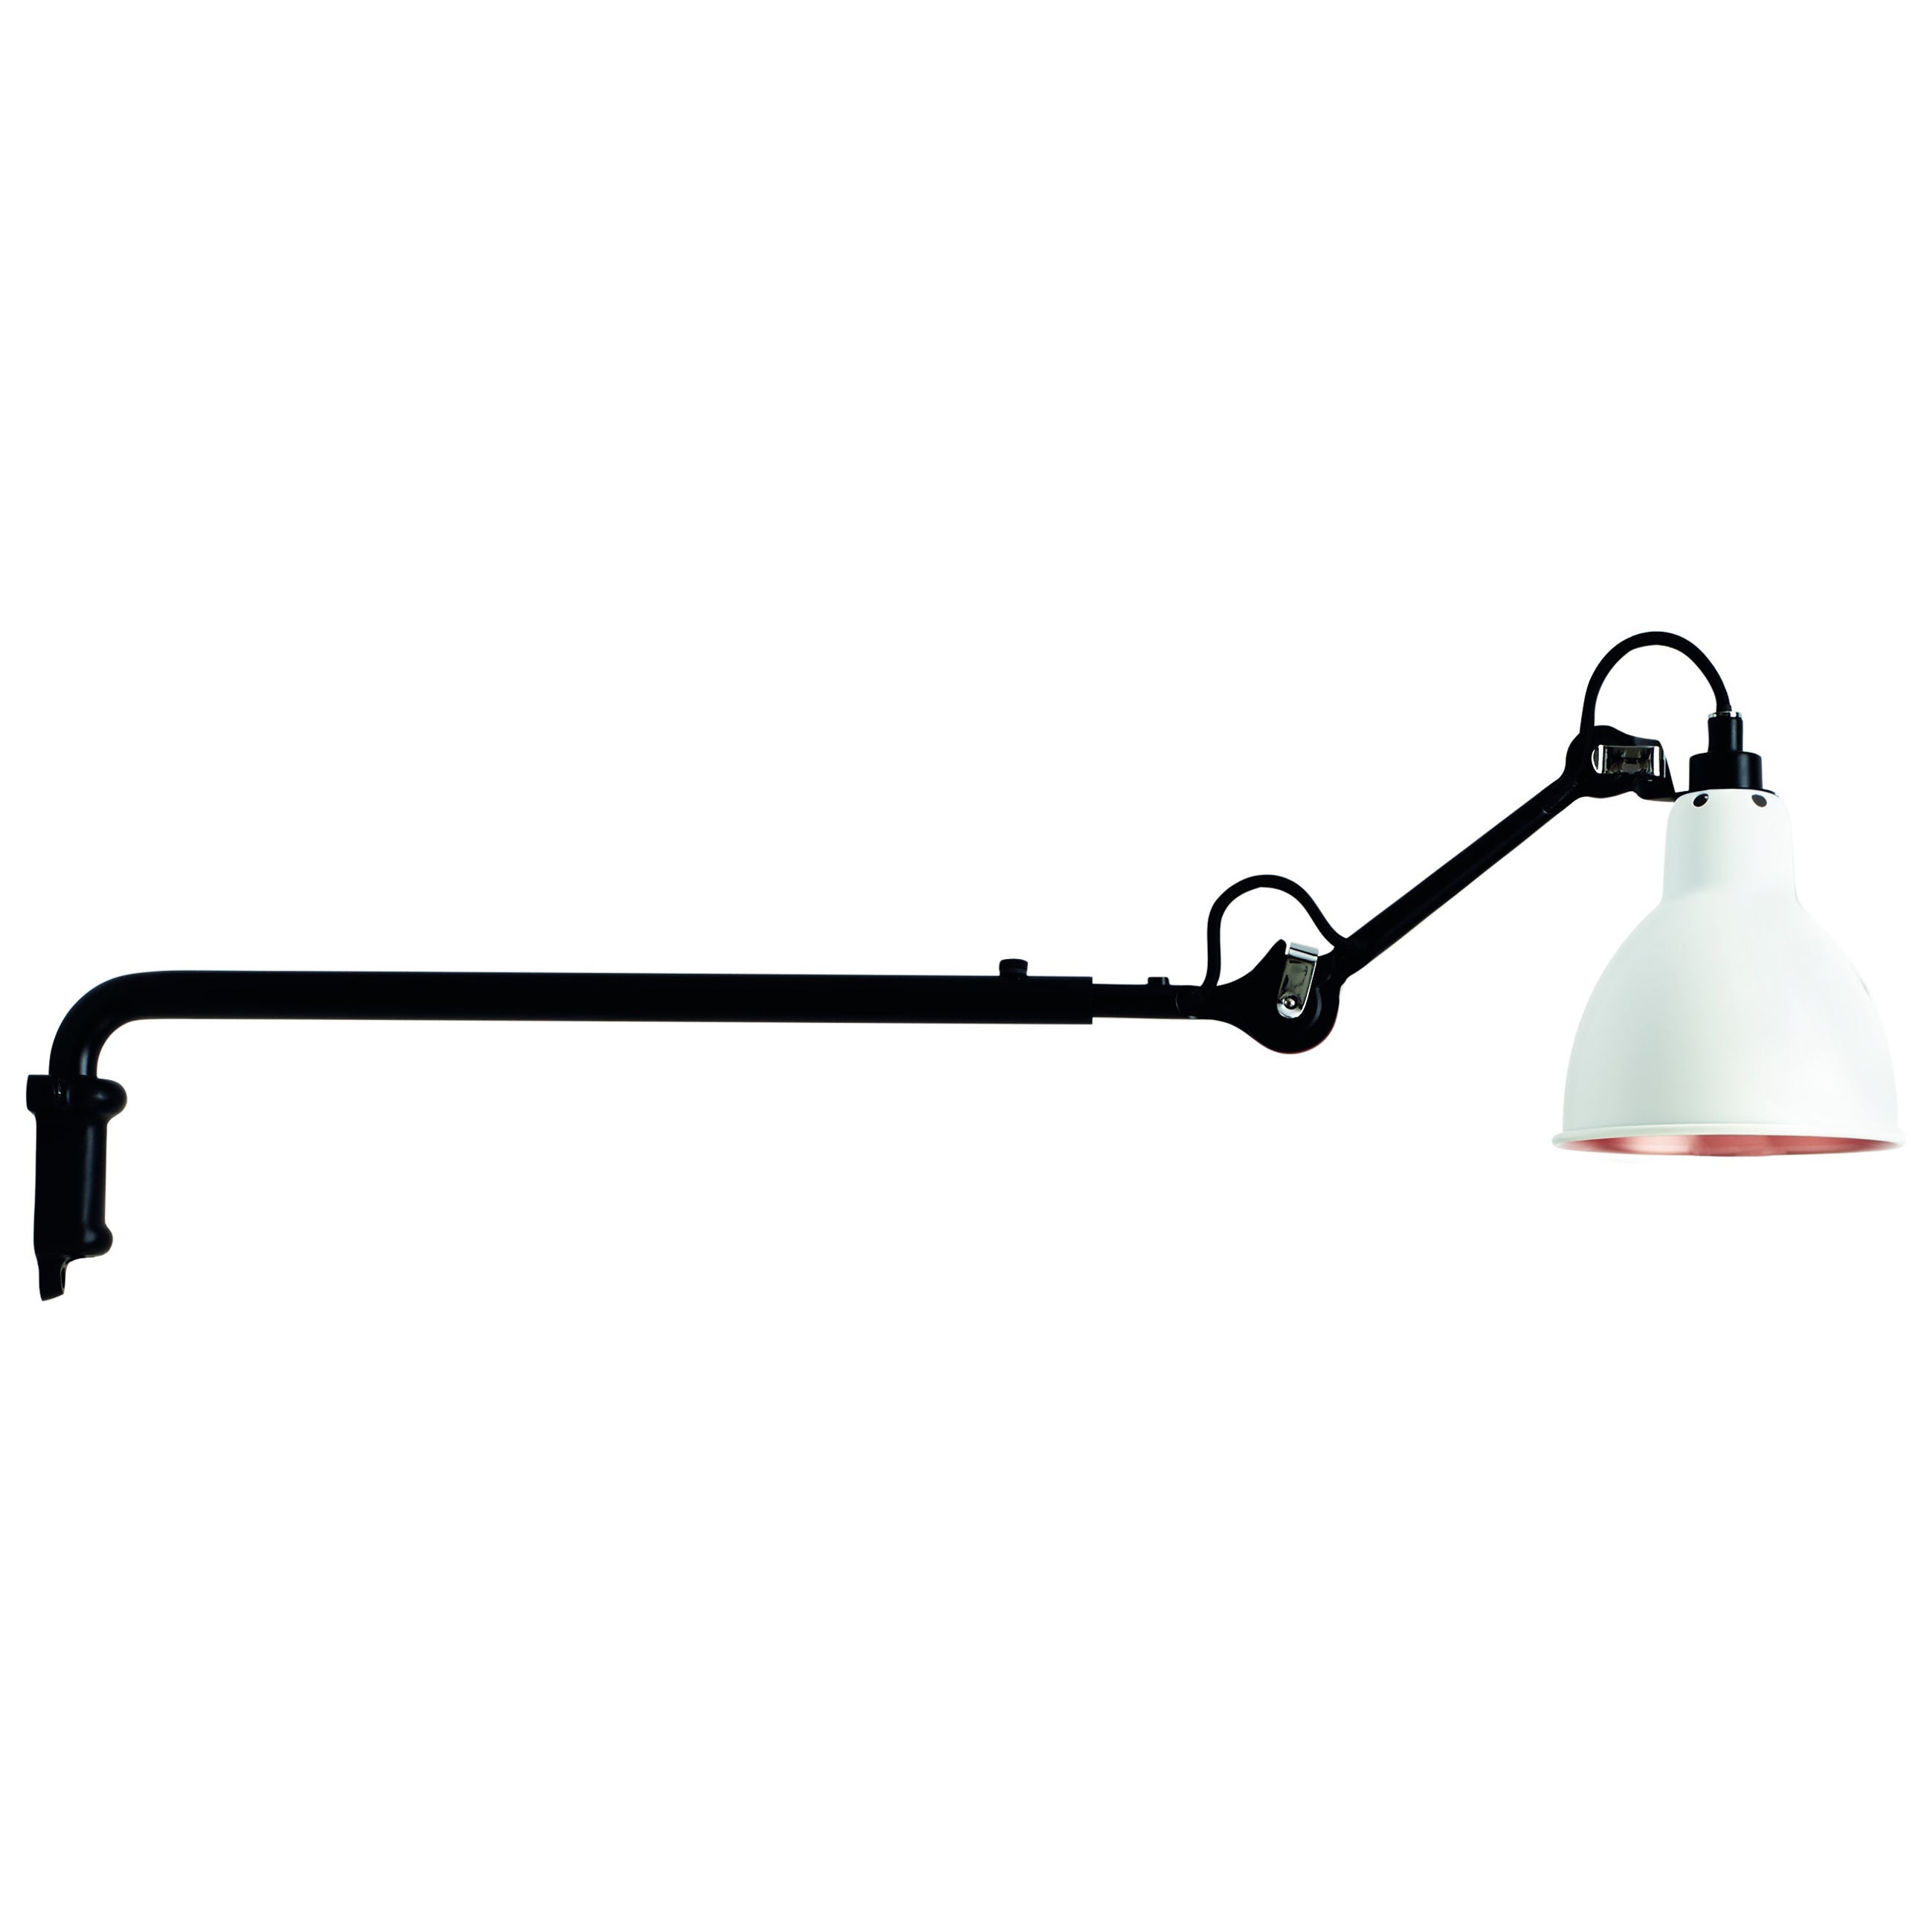 DCW Editions La Lampe Gras N°203 Wall Lamp in Black Arm & White Copper Shade